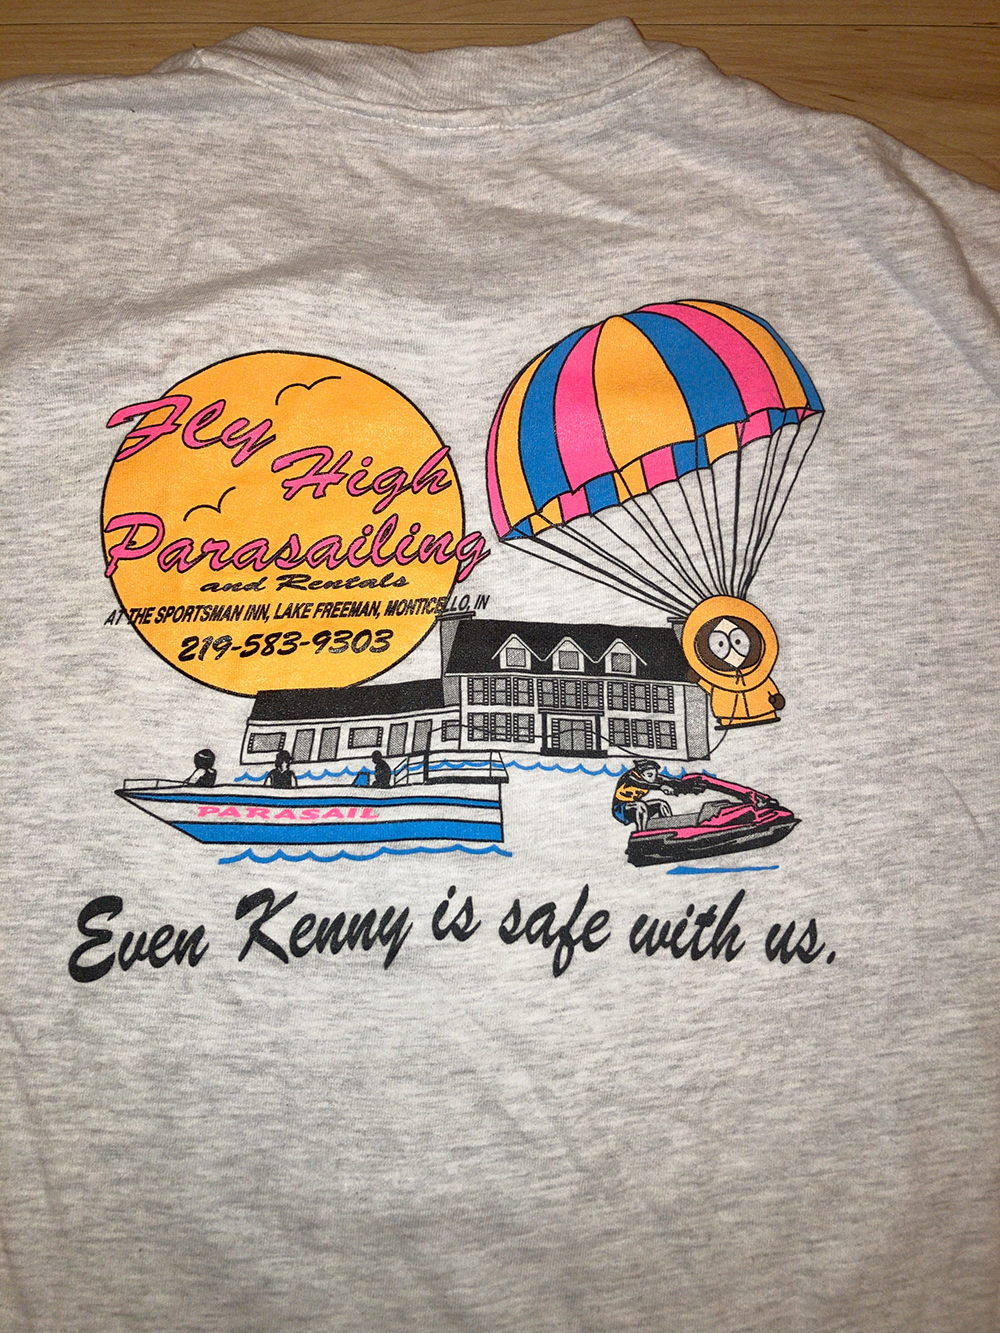 vintage fly high parasailing even kenny is safe with us bootleg south park t-shirt